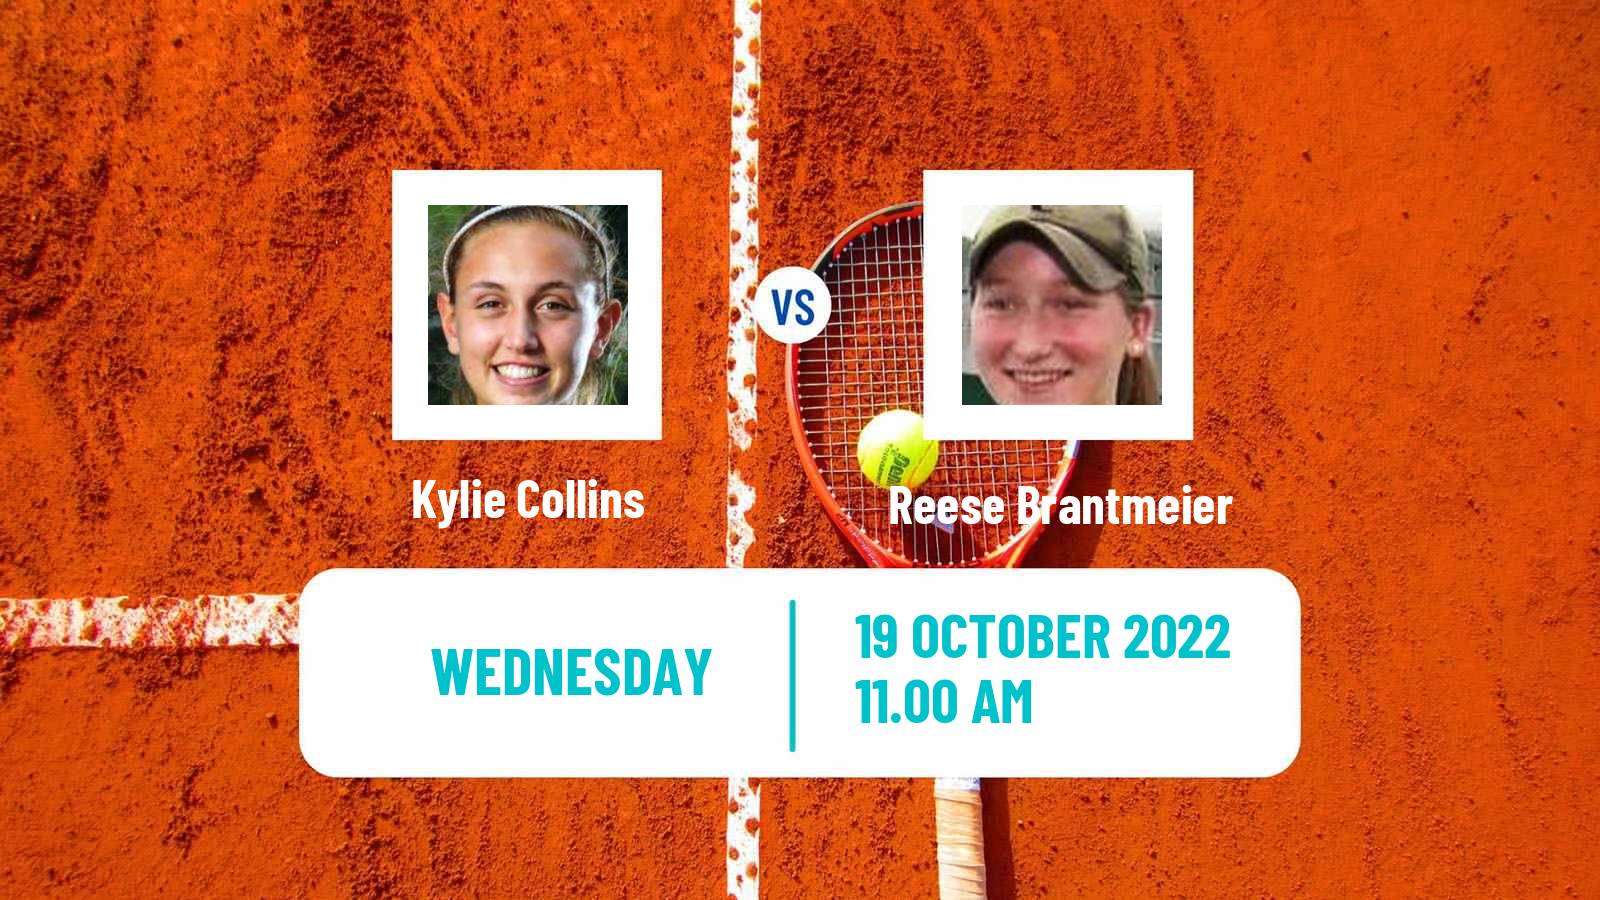 Tennis ITF Tournaments Kylie Collins - Reese Brantmeier